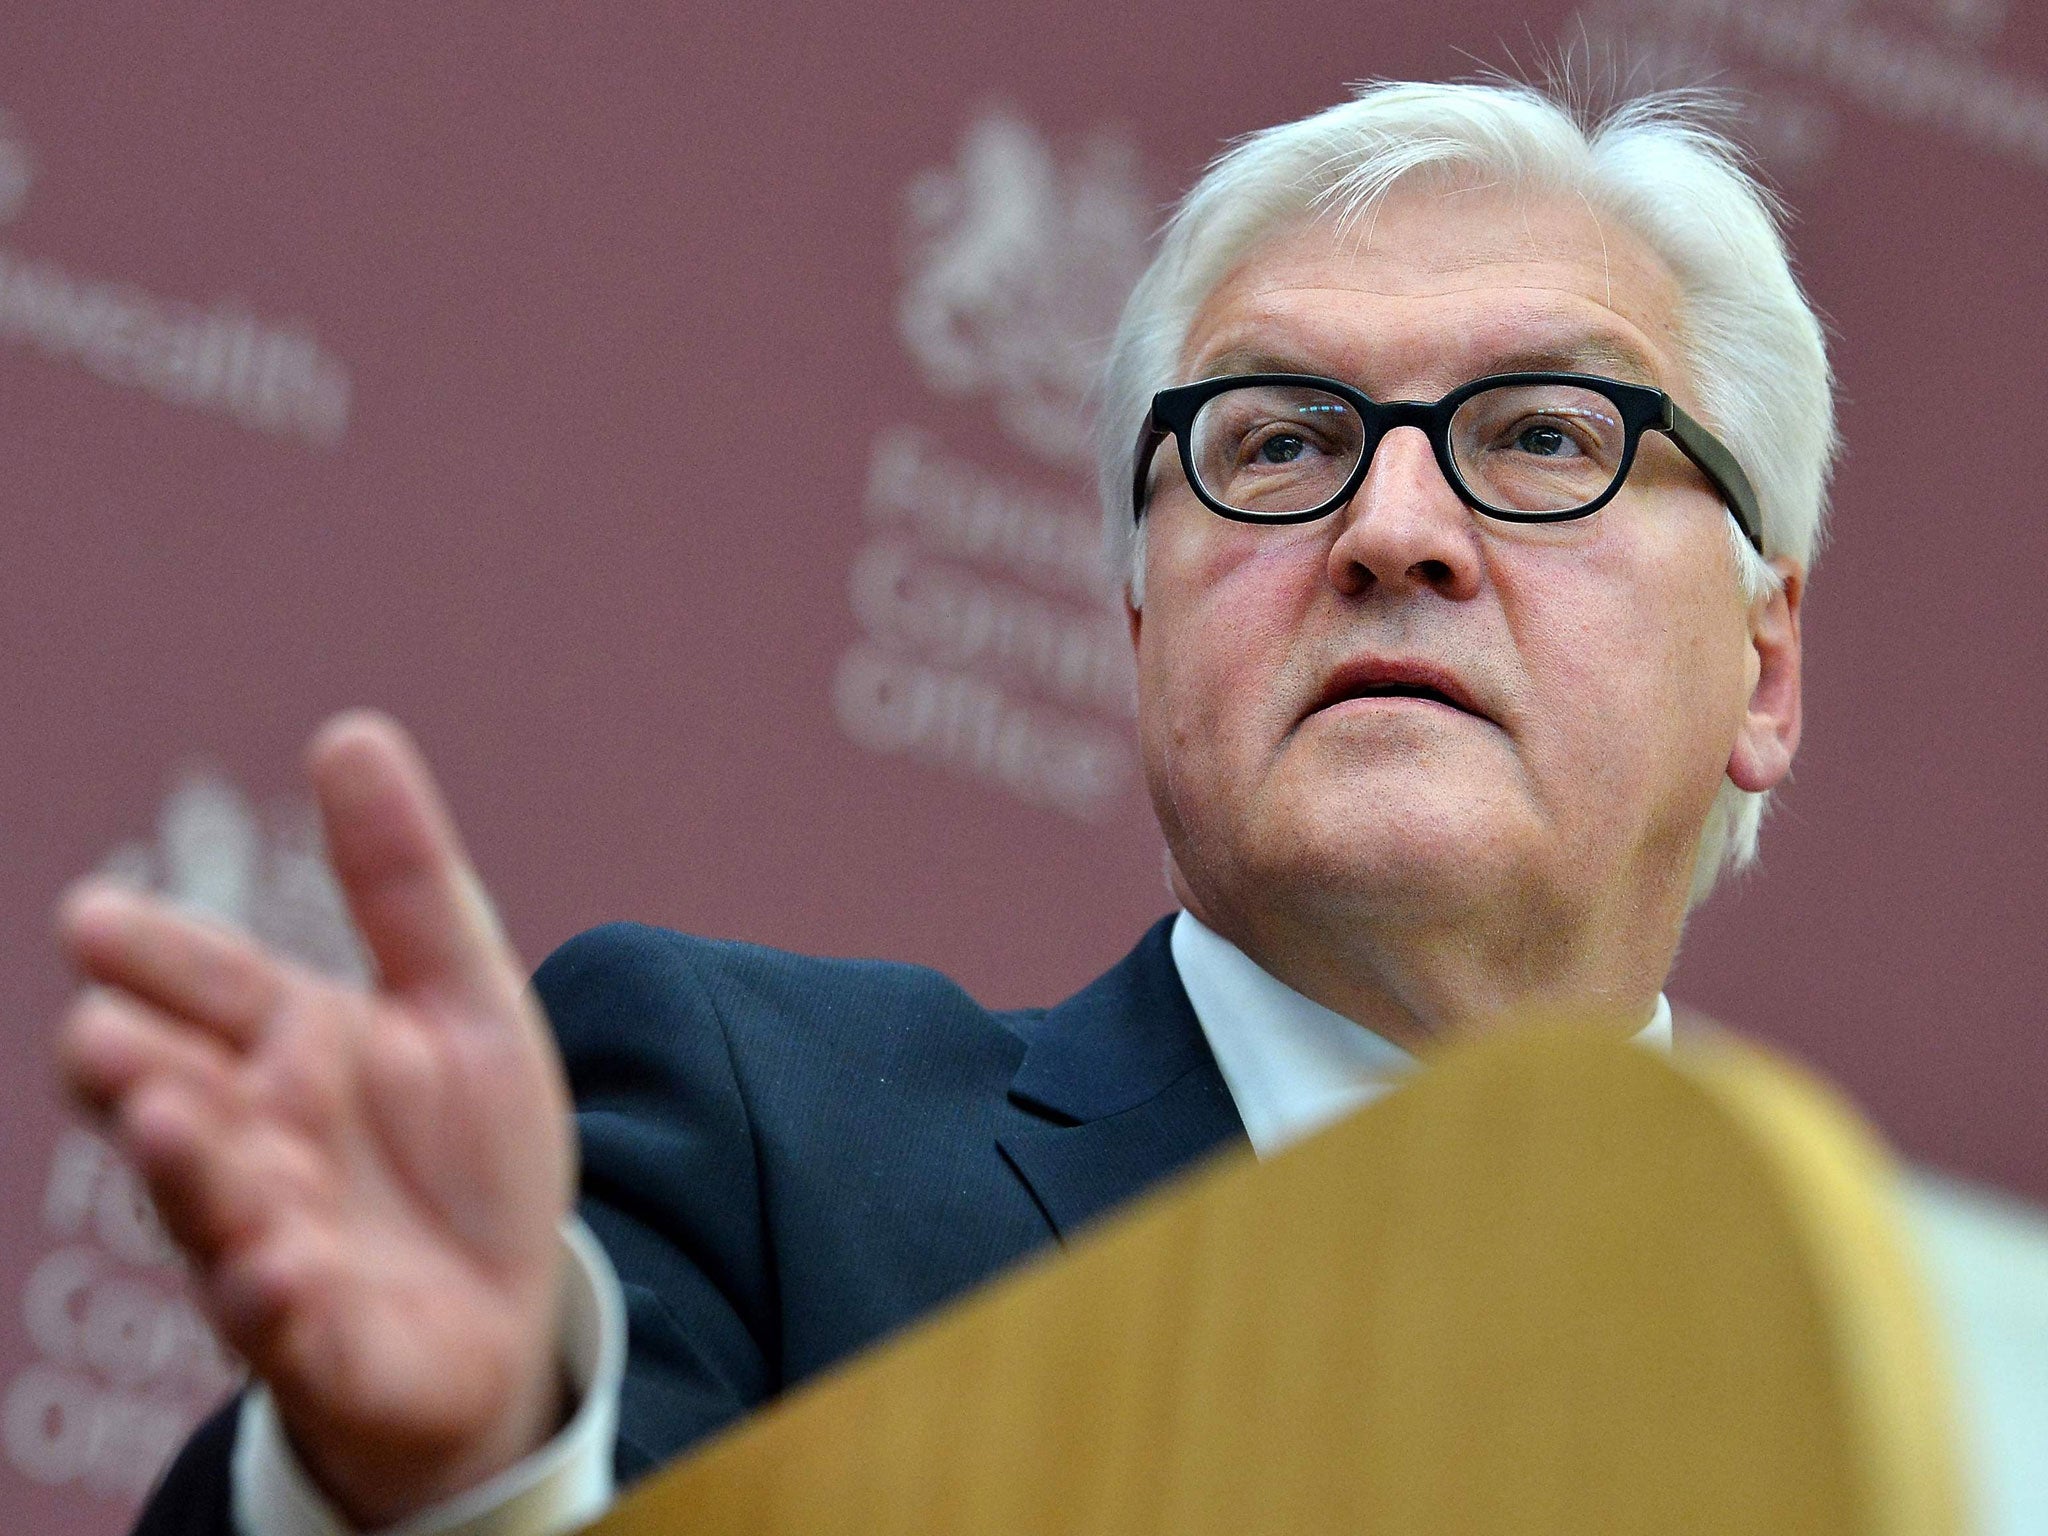 Germany's Foreign Minister Frank-Walter Steinmeier speaks during a news conference with Britain's Foreign Secretary William Hague in the Foreign and Commonwealth Office February 3, 2014